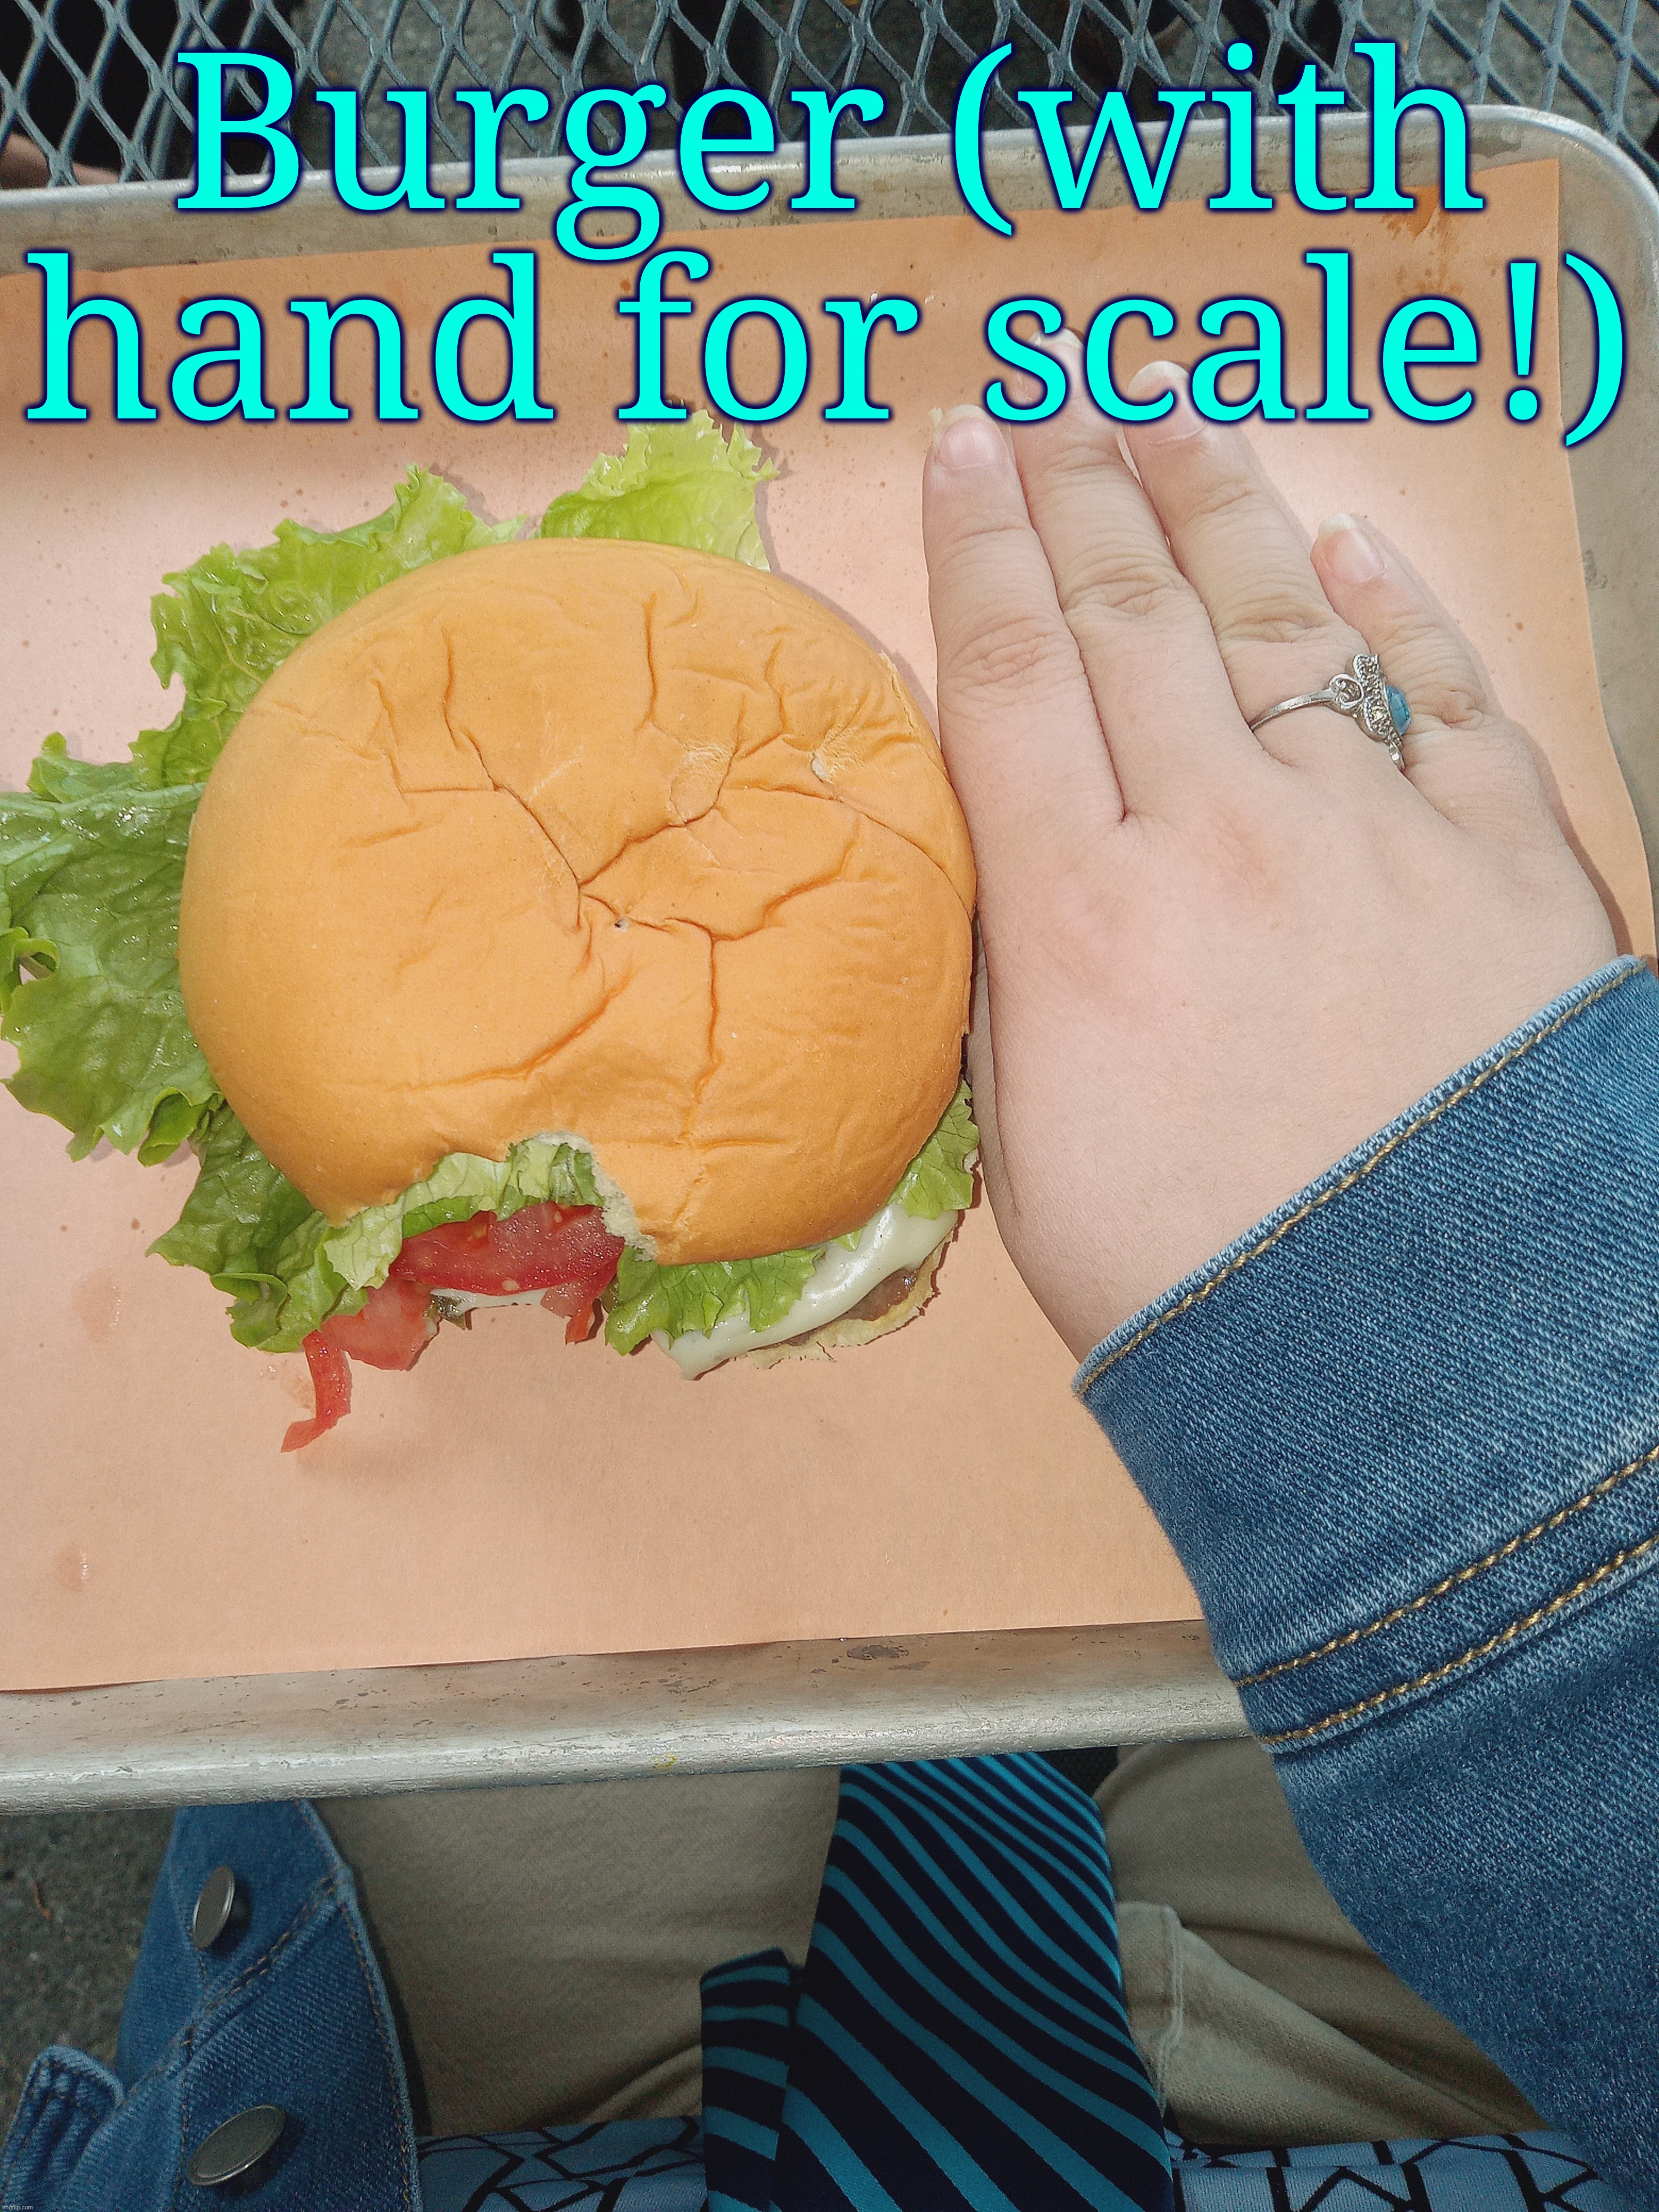 . | Burger (with hand for scale!) | made w/ Imgflip meme maker